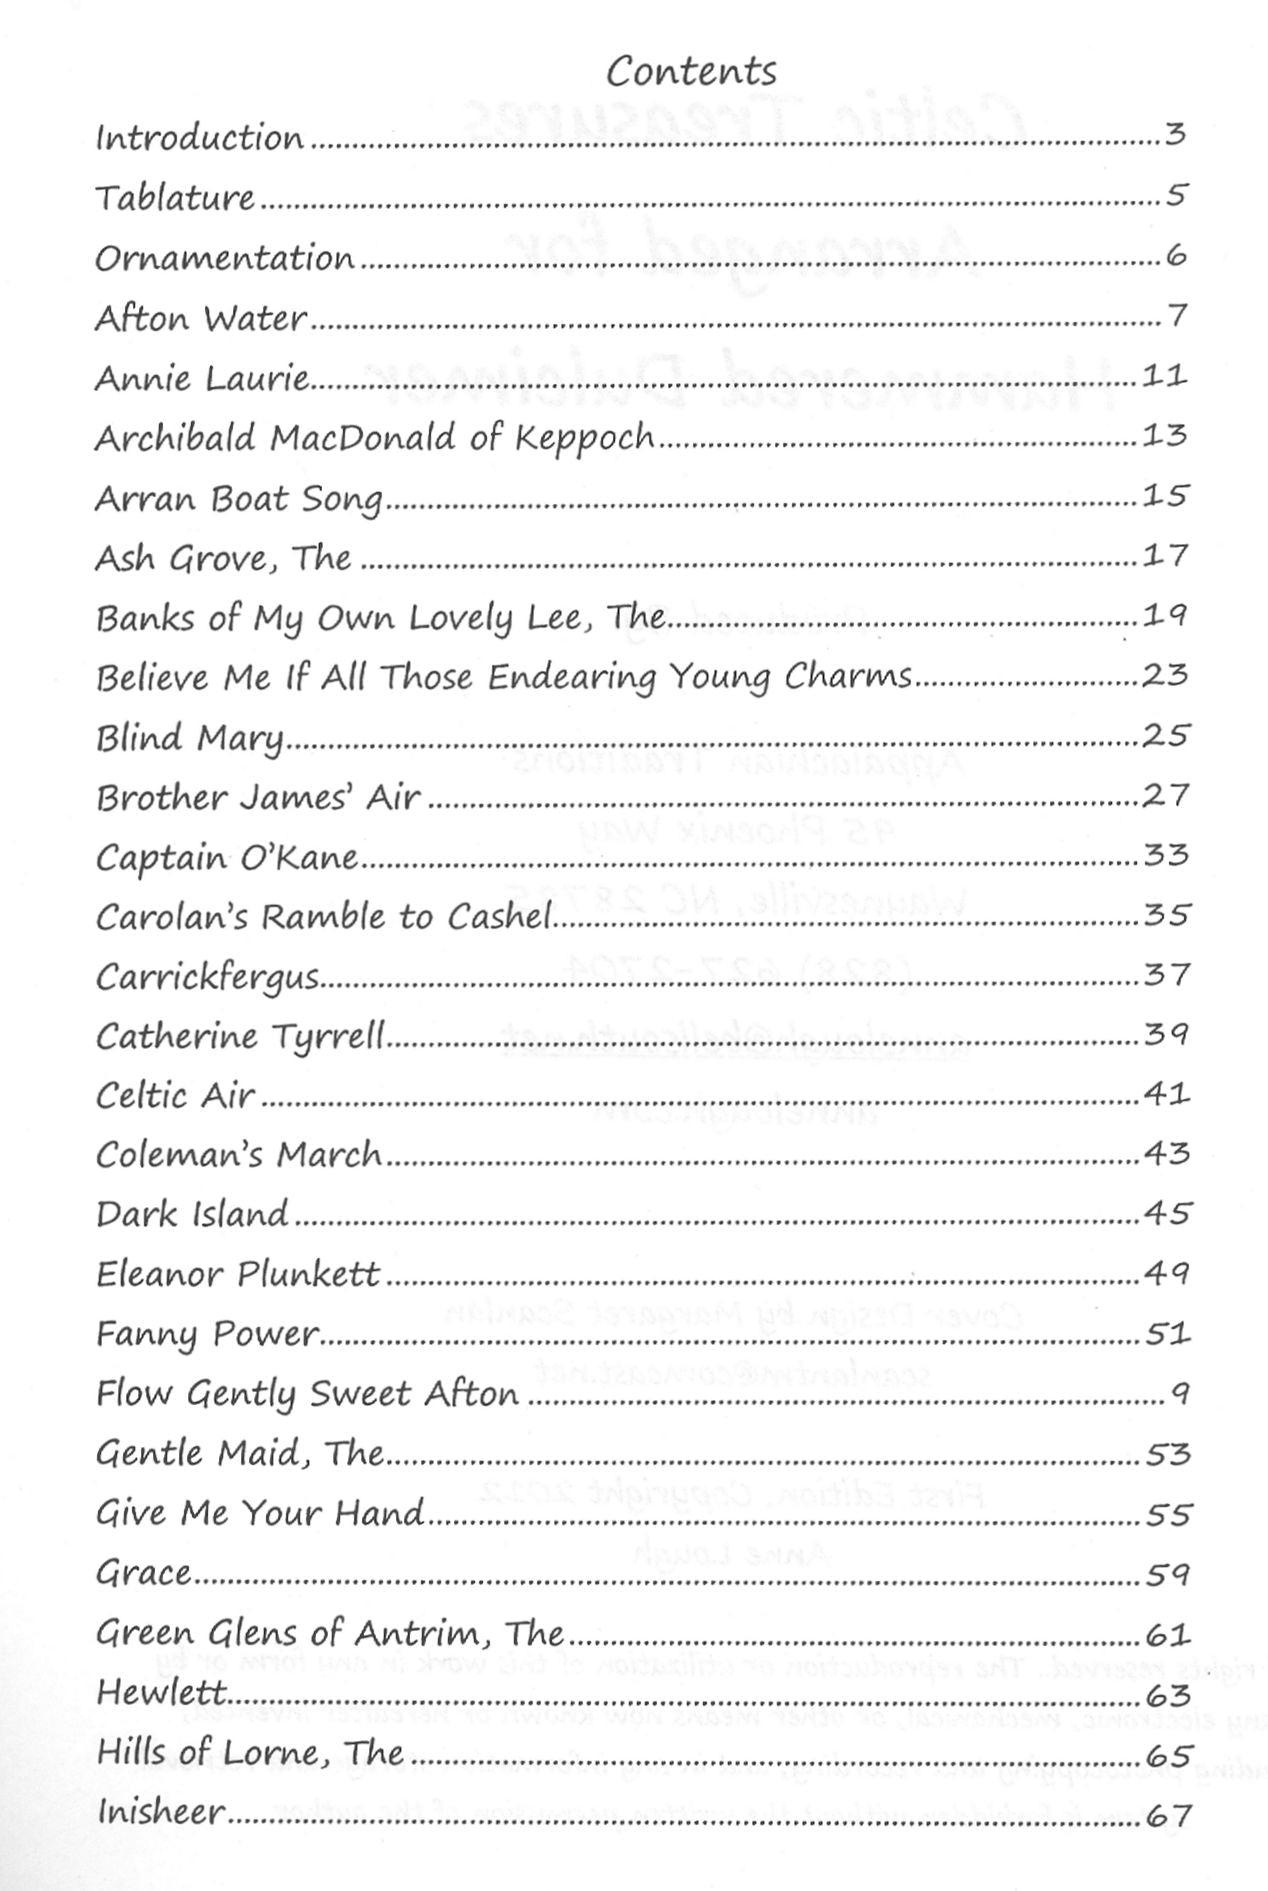 Image of a table of contents from Celtic Treasures for Hammered Dulcimer by Anne Lough, listing chapter titles like "Arabic Boat Song," "Catherine Tyrrell," and "Hints of Lorne arranged in traditional keys.